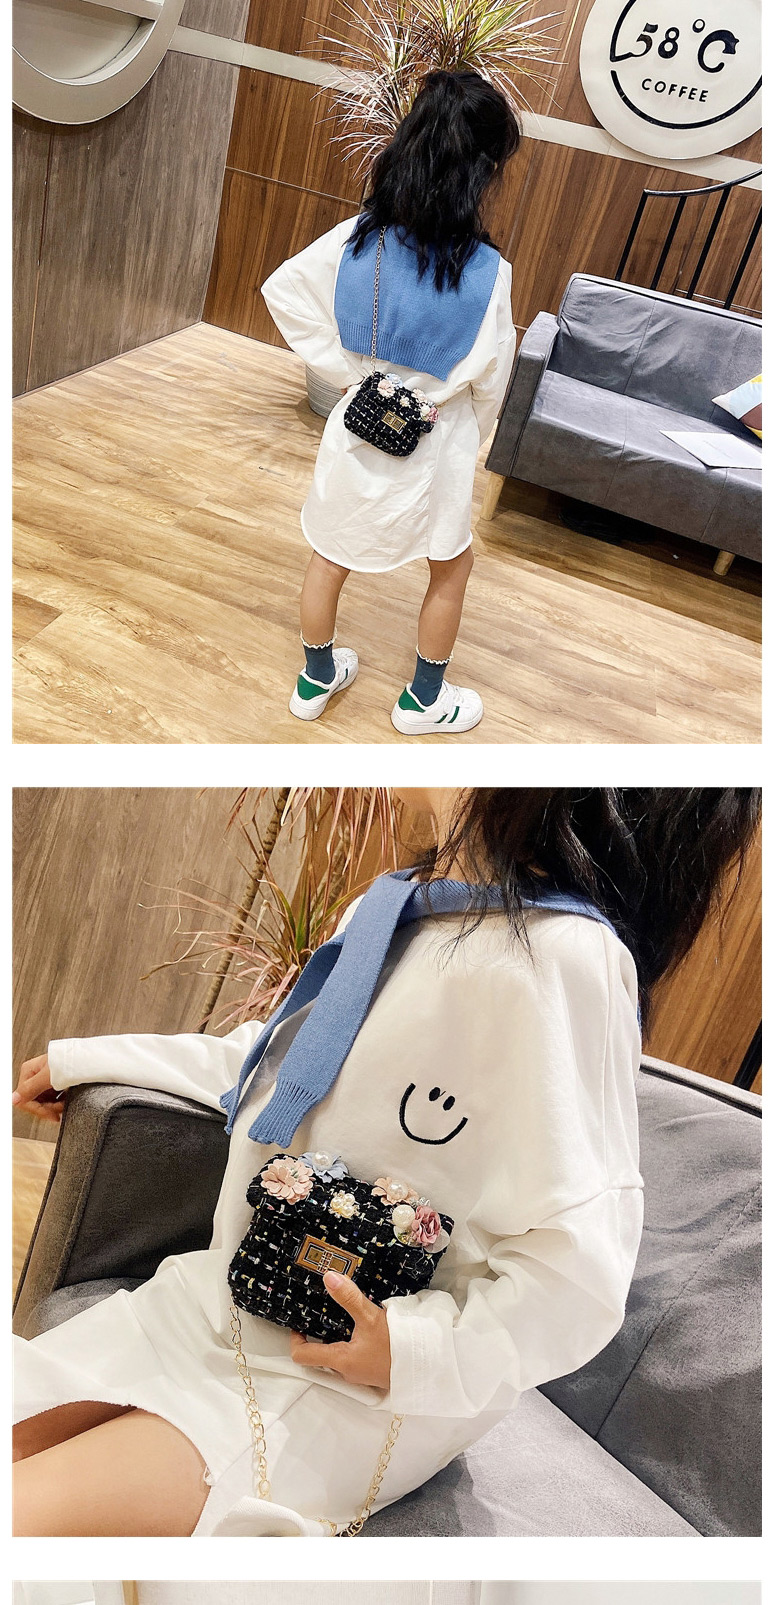 Fashion Two White Childrens Shoulder Messenger Bag With Chain Lock Flap Flower,Shoulder bags